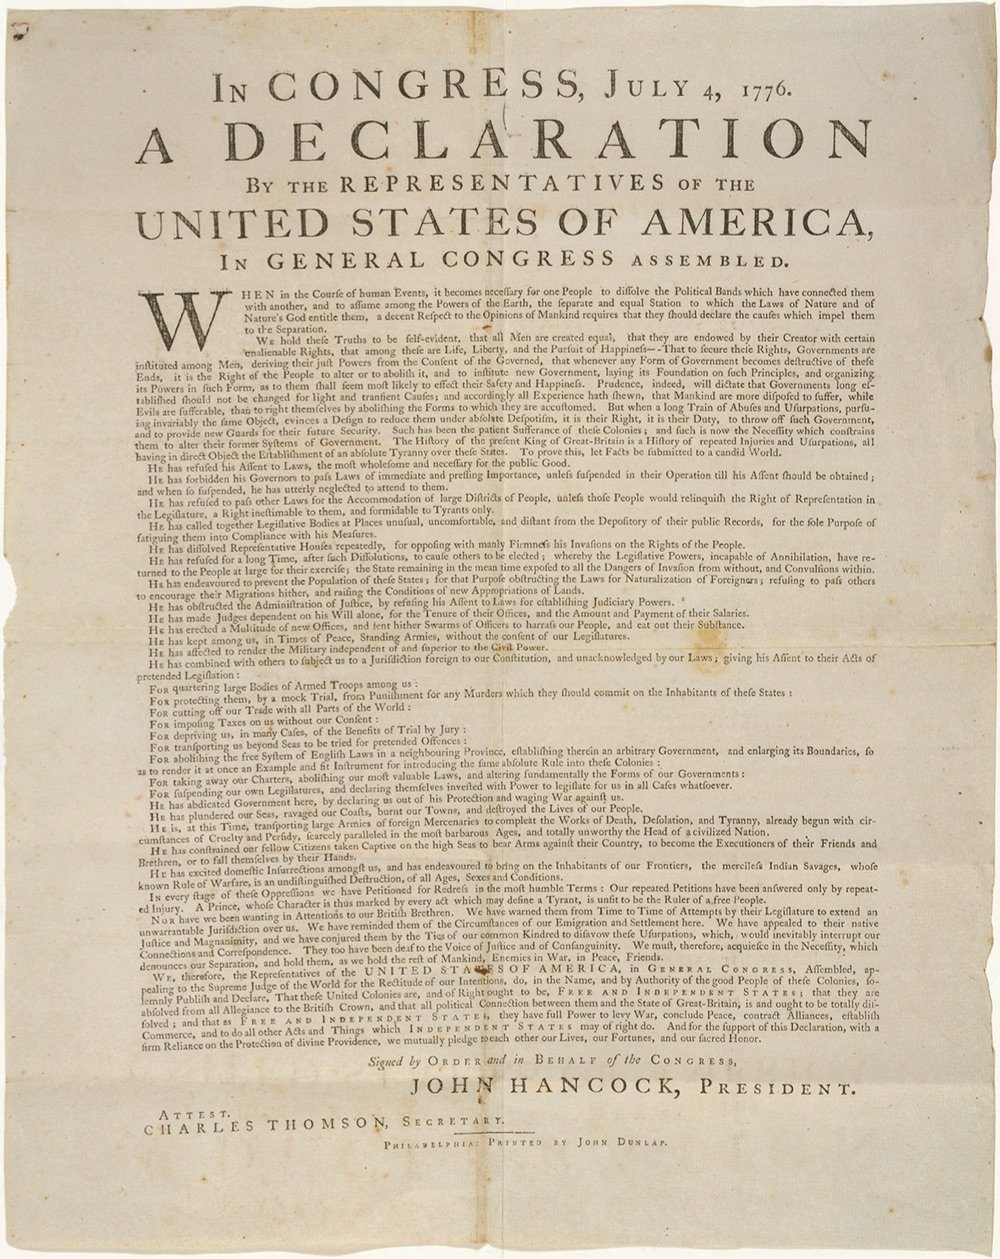 a copy of the original printing of the Declaration of Independence